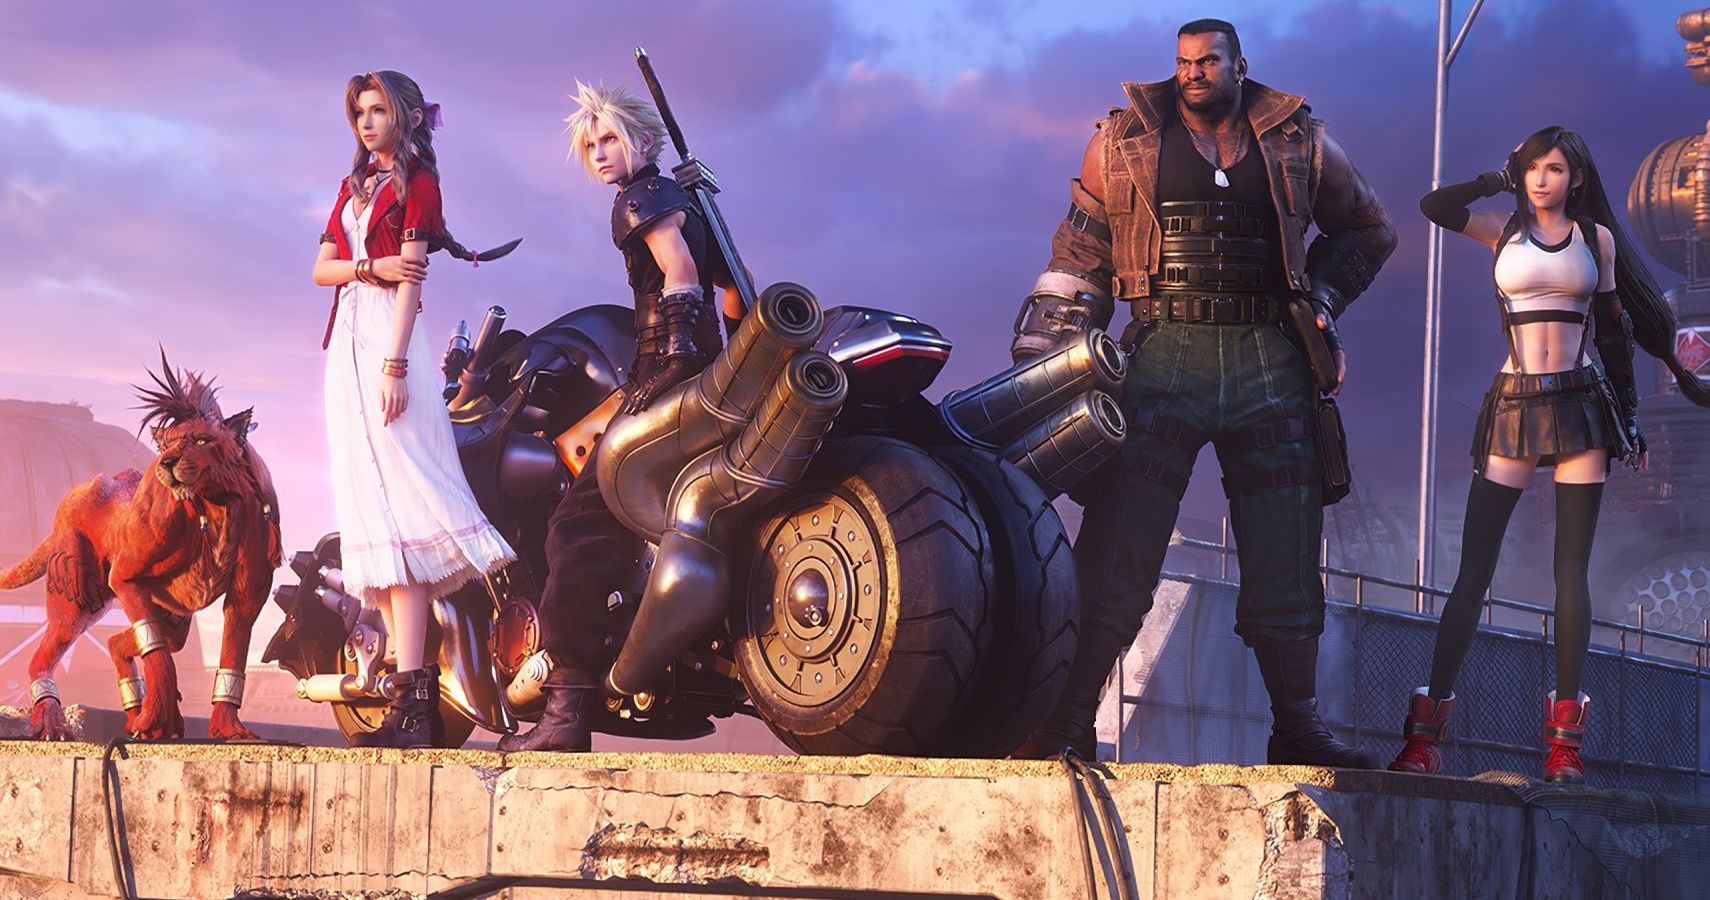 Red XIII, Aerith, Cloud, Barret and Tifa stand at the edge of Midgar